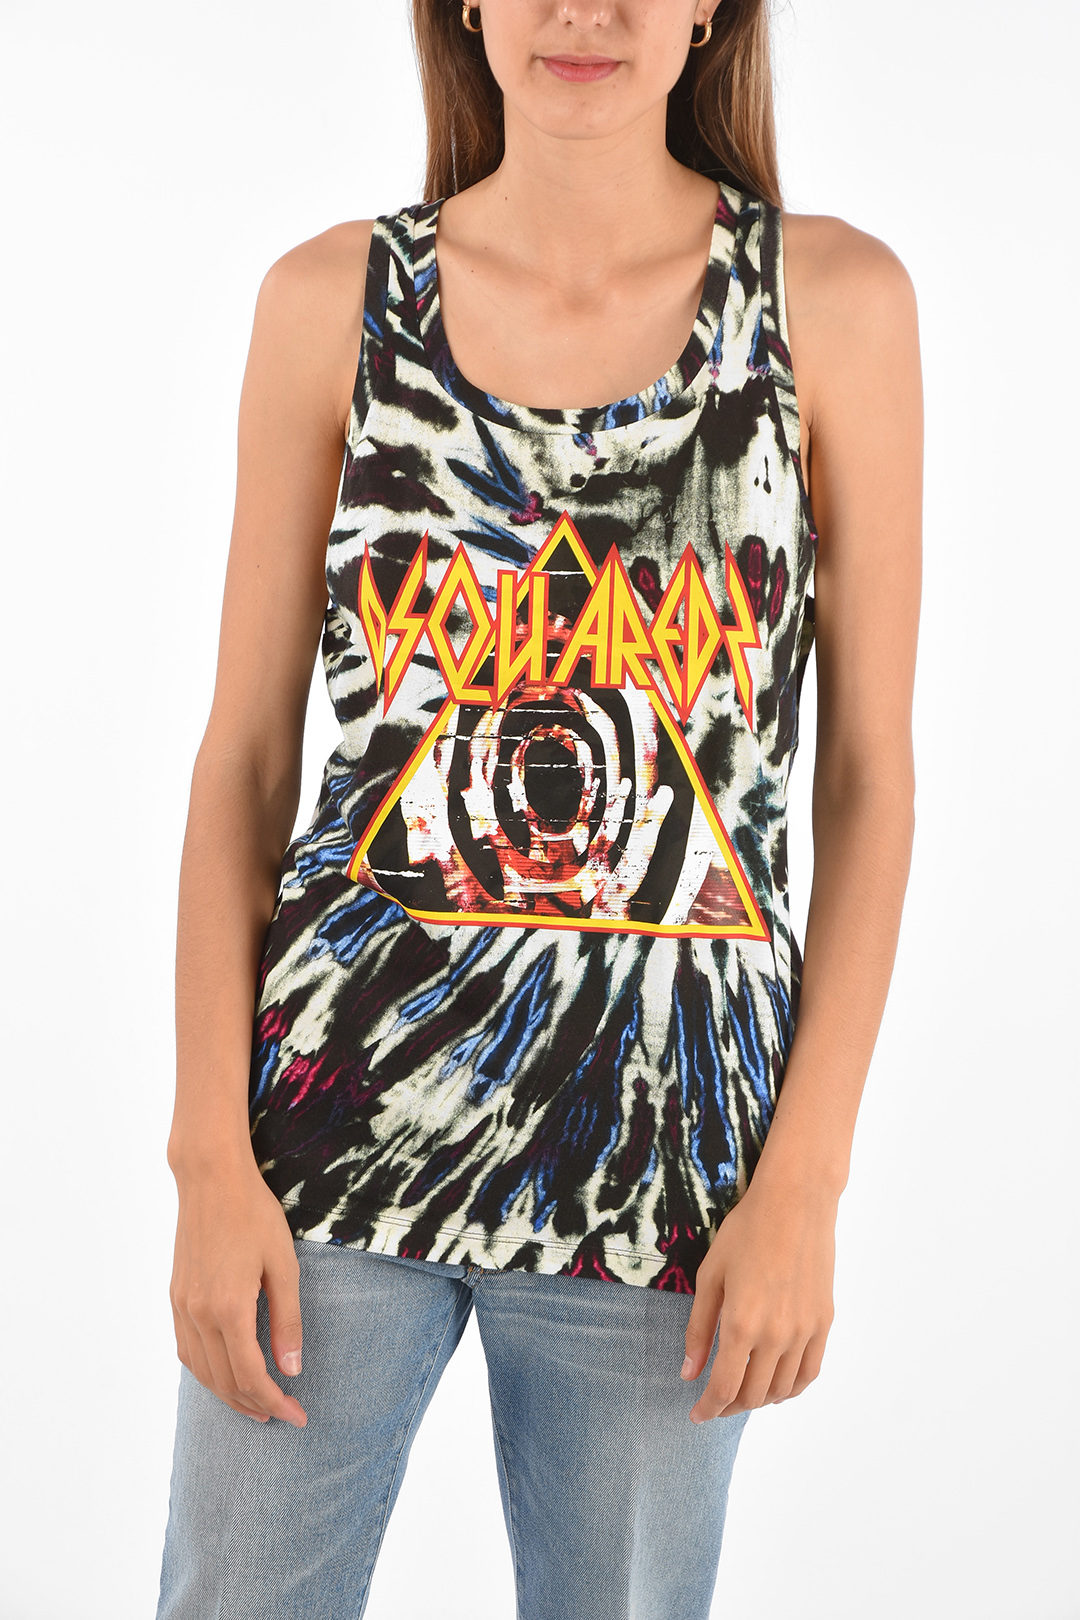 Printed Tank women - Glamood Outlet